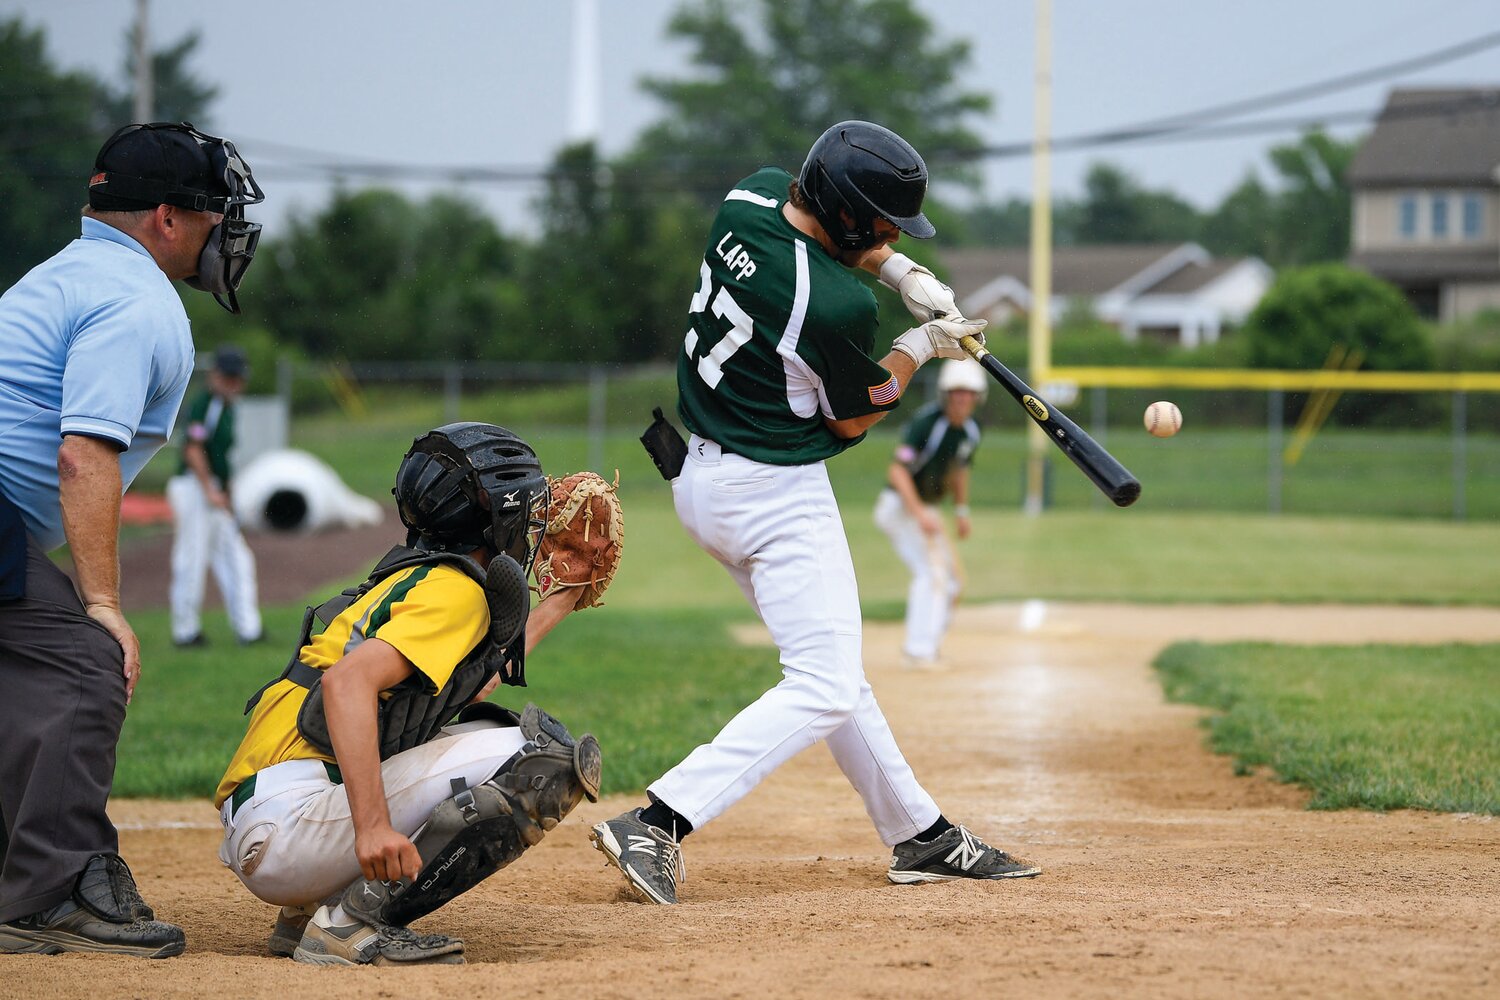 Pennridge’s Nate Lapp connects for an RBI in the fourth inning of Game 1 of Sunday’s doubleheader.